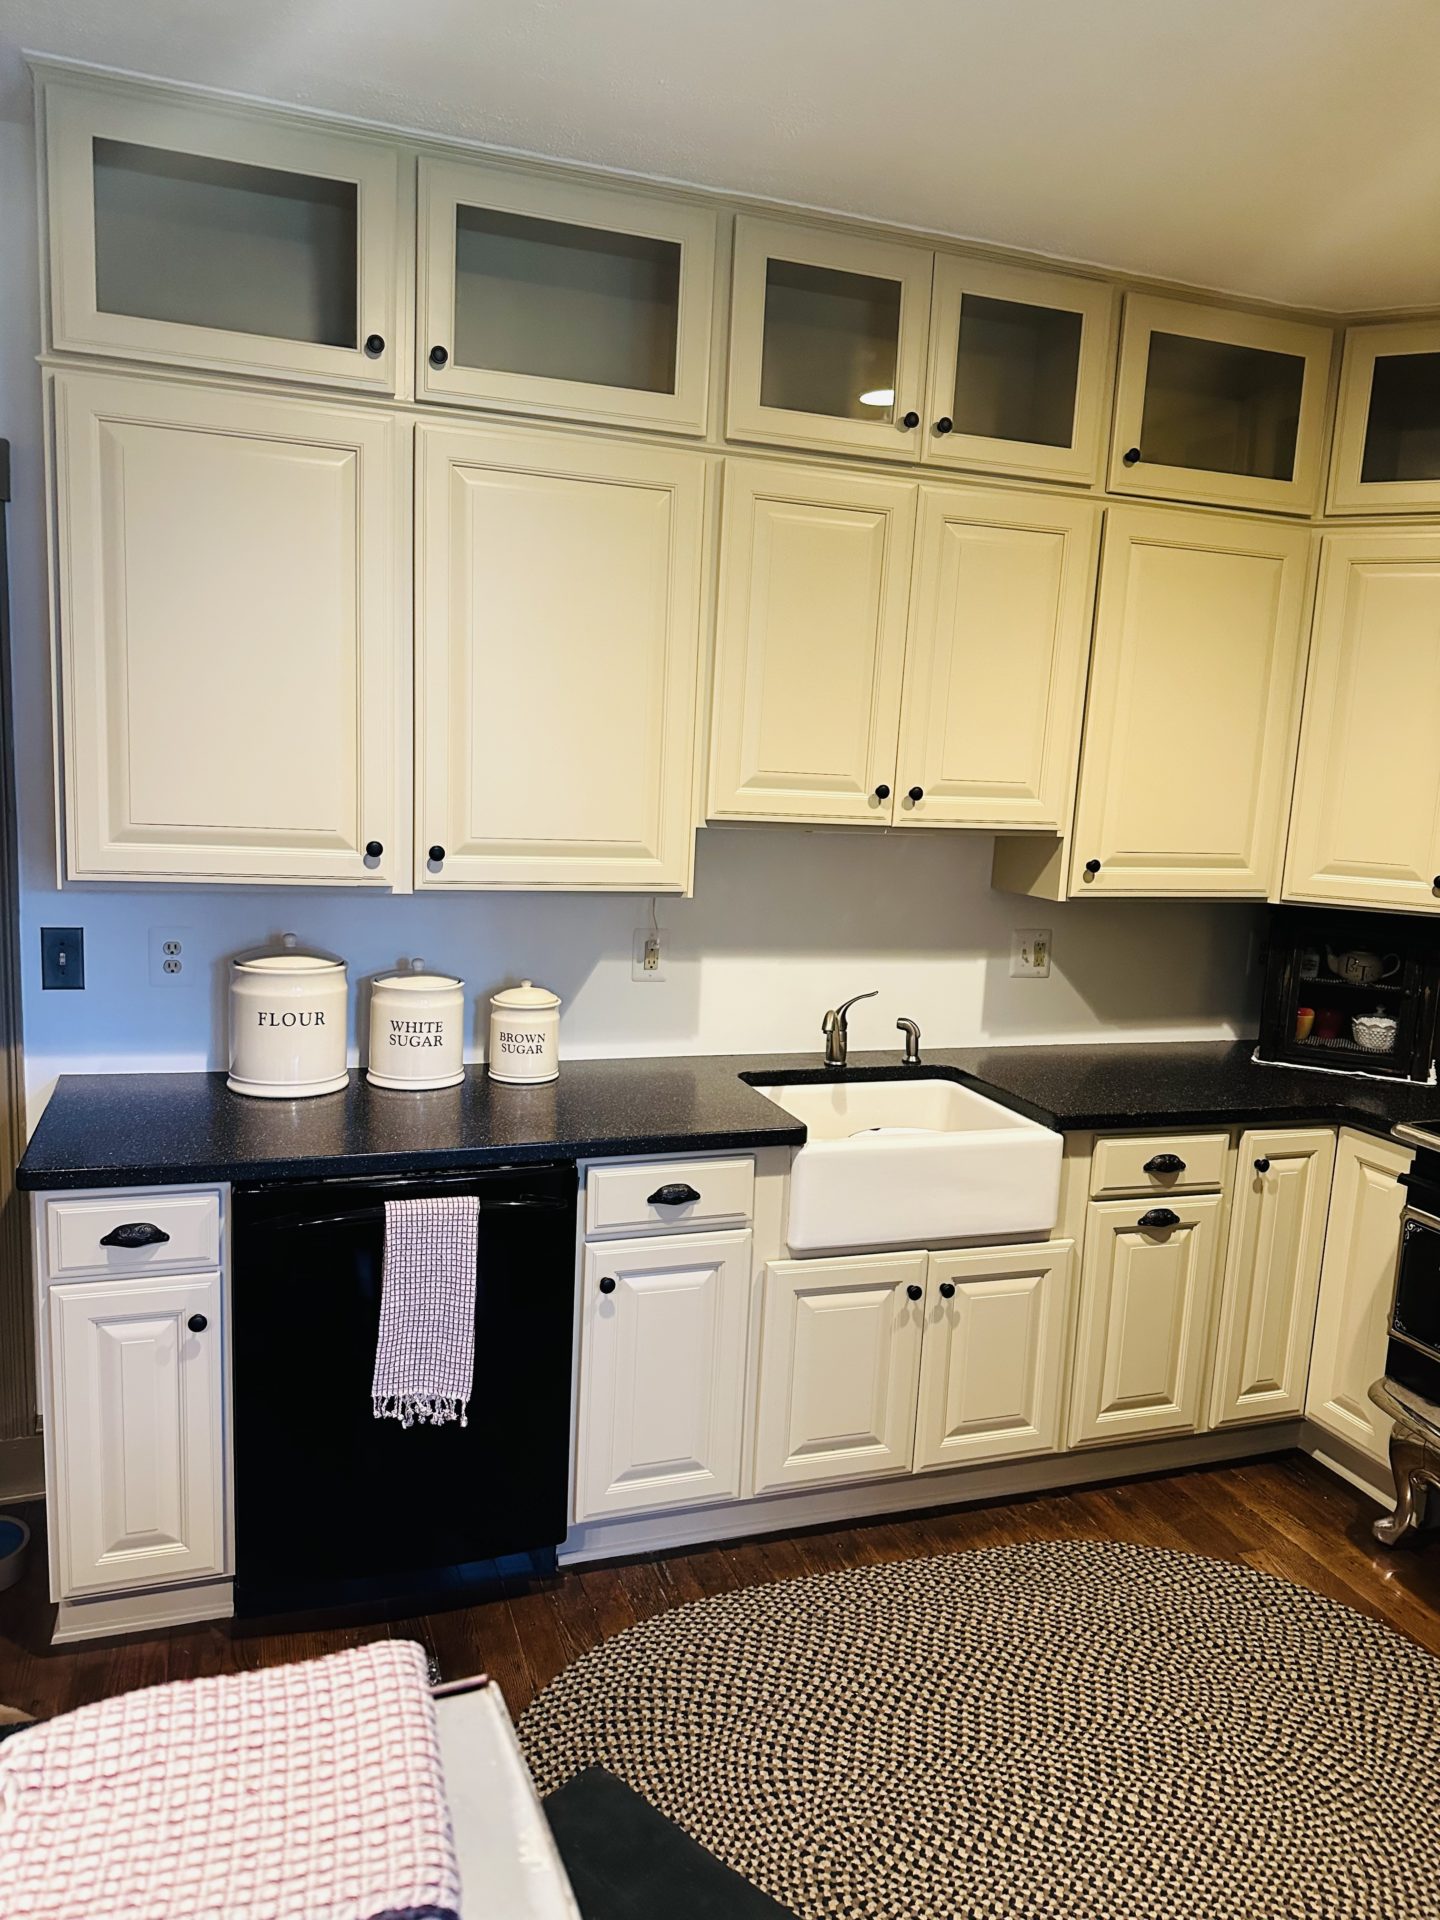 Freshly painted cabinets services results in kitchen space